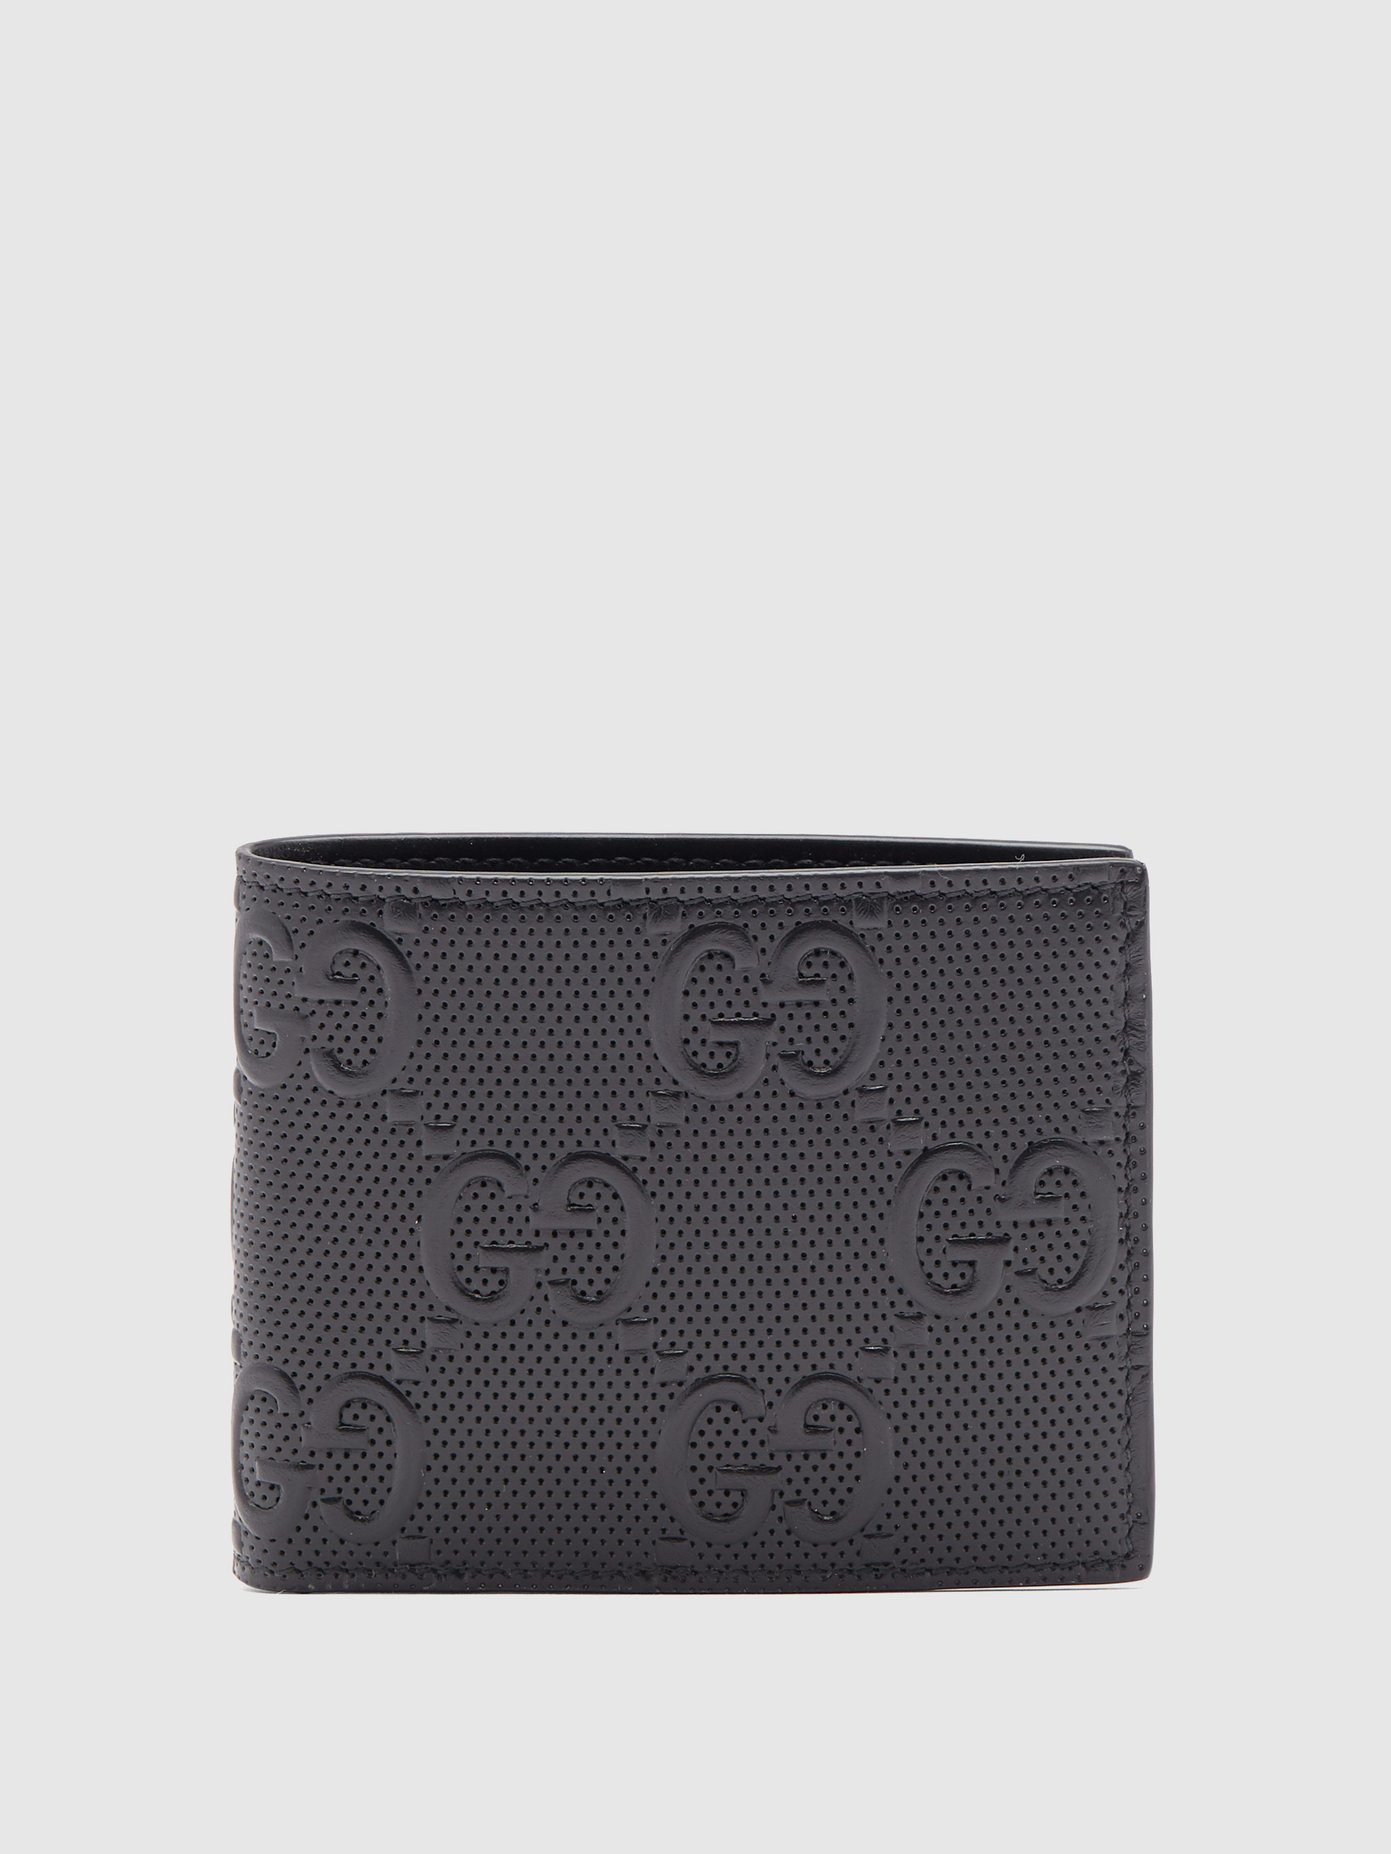 gucci leather bifold wallet